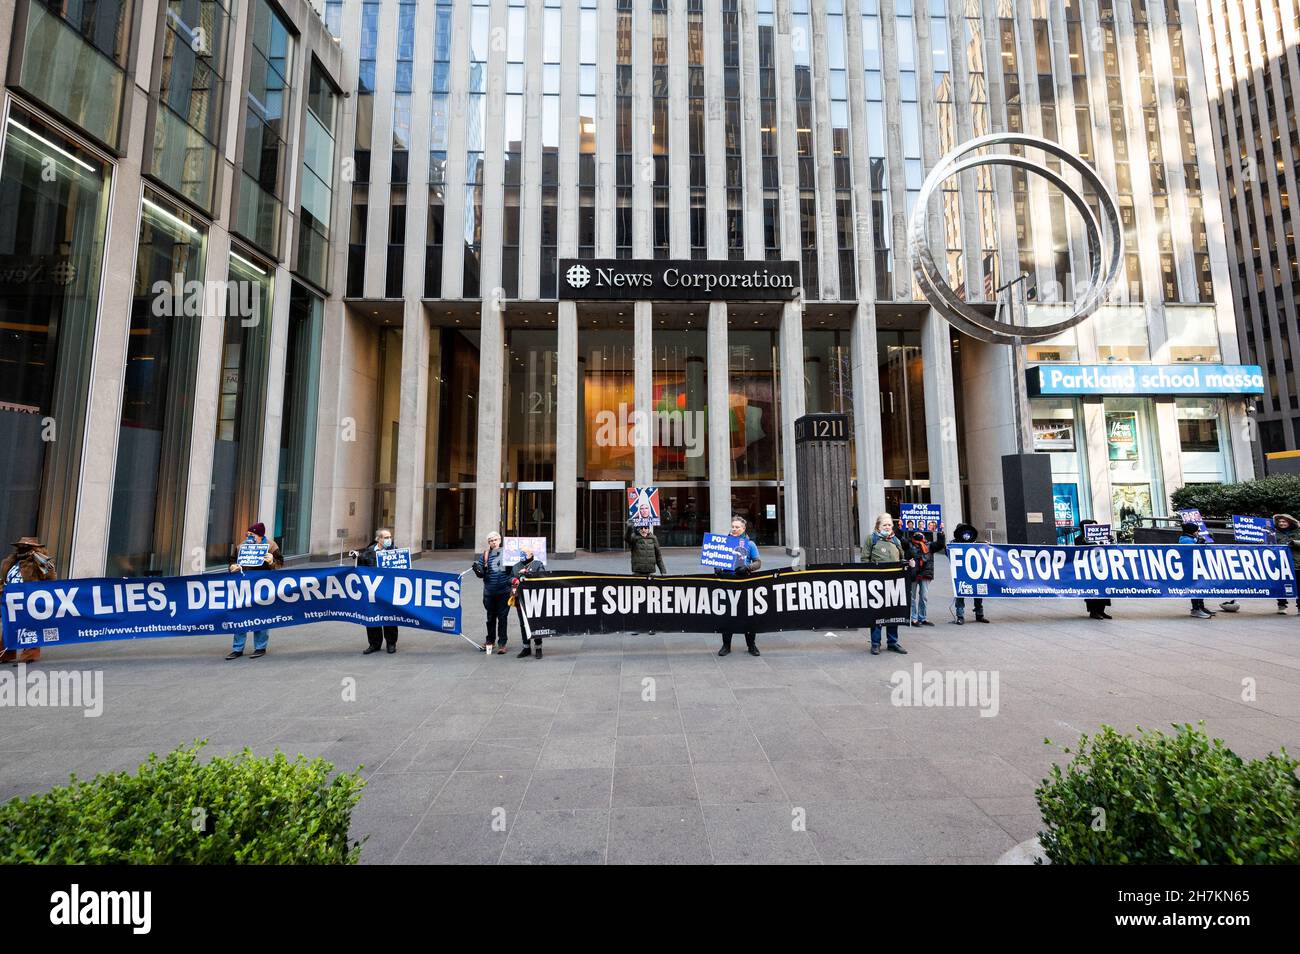 New York, United States. 23rd Nov, 2021. Protesters hold banners saying Fox lies, democracy dies, White Supremacy is terrorism and Fox: Stop hurting America during a protest against Fox News outside its building on Sixth Avenue. Credit: SOPA Images Limited/Alamy Live News Stock Photo